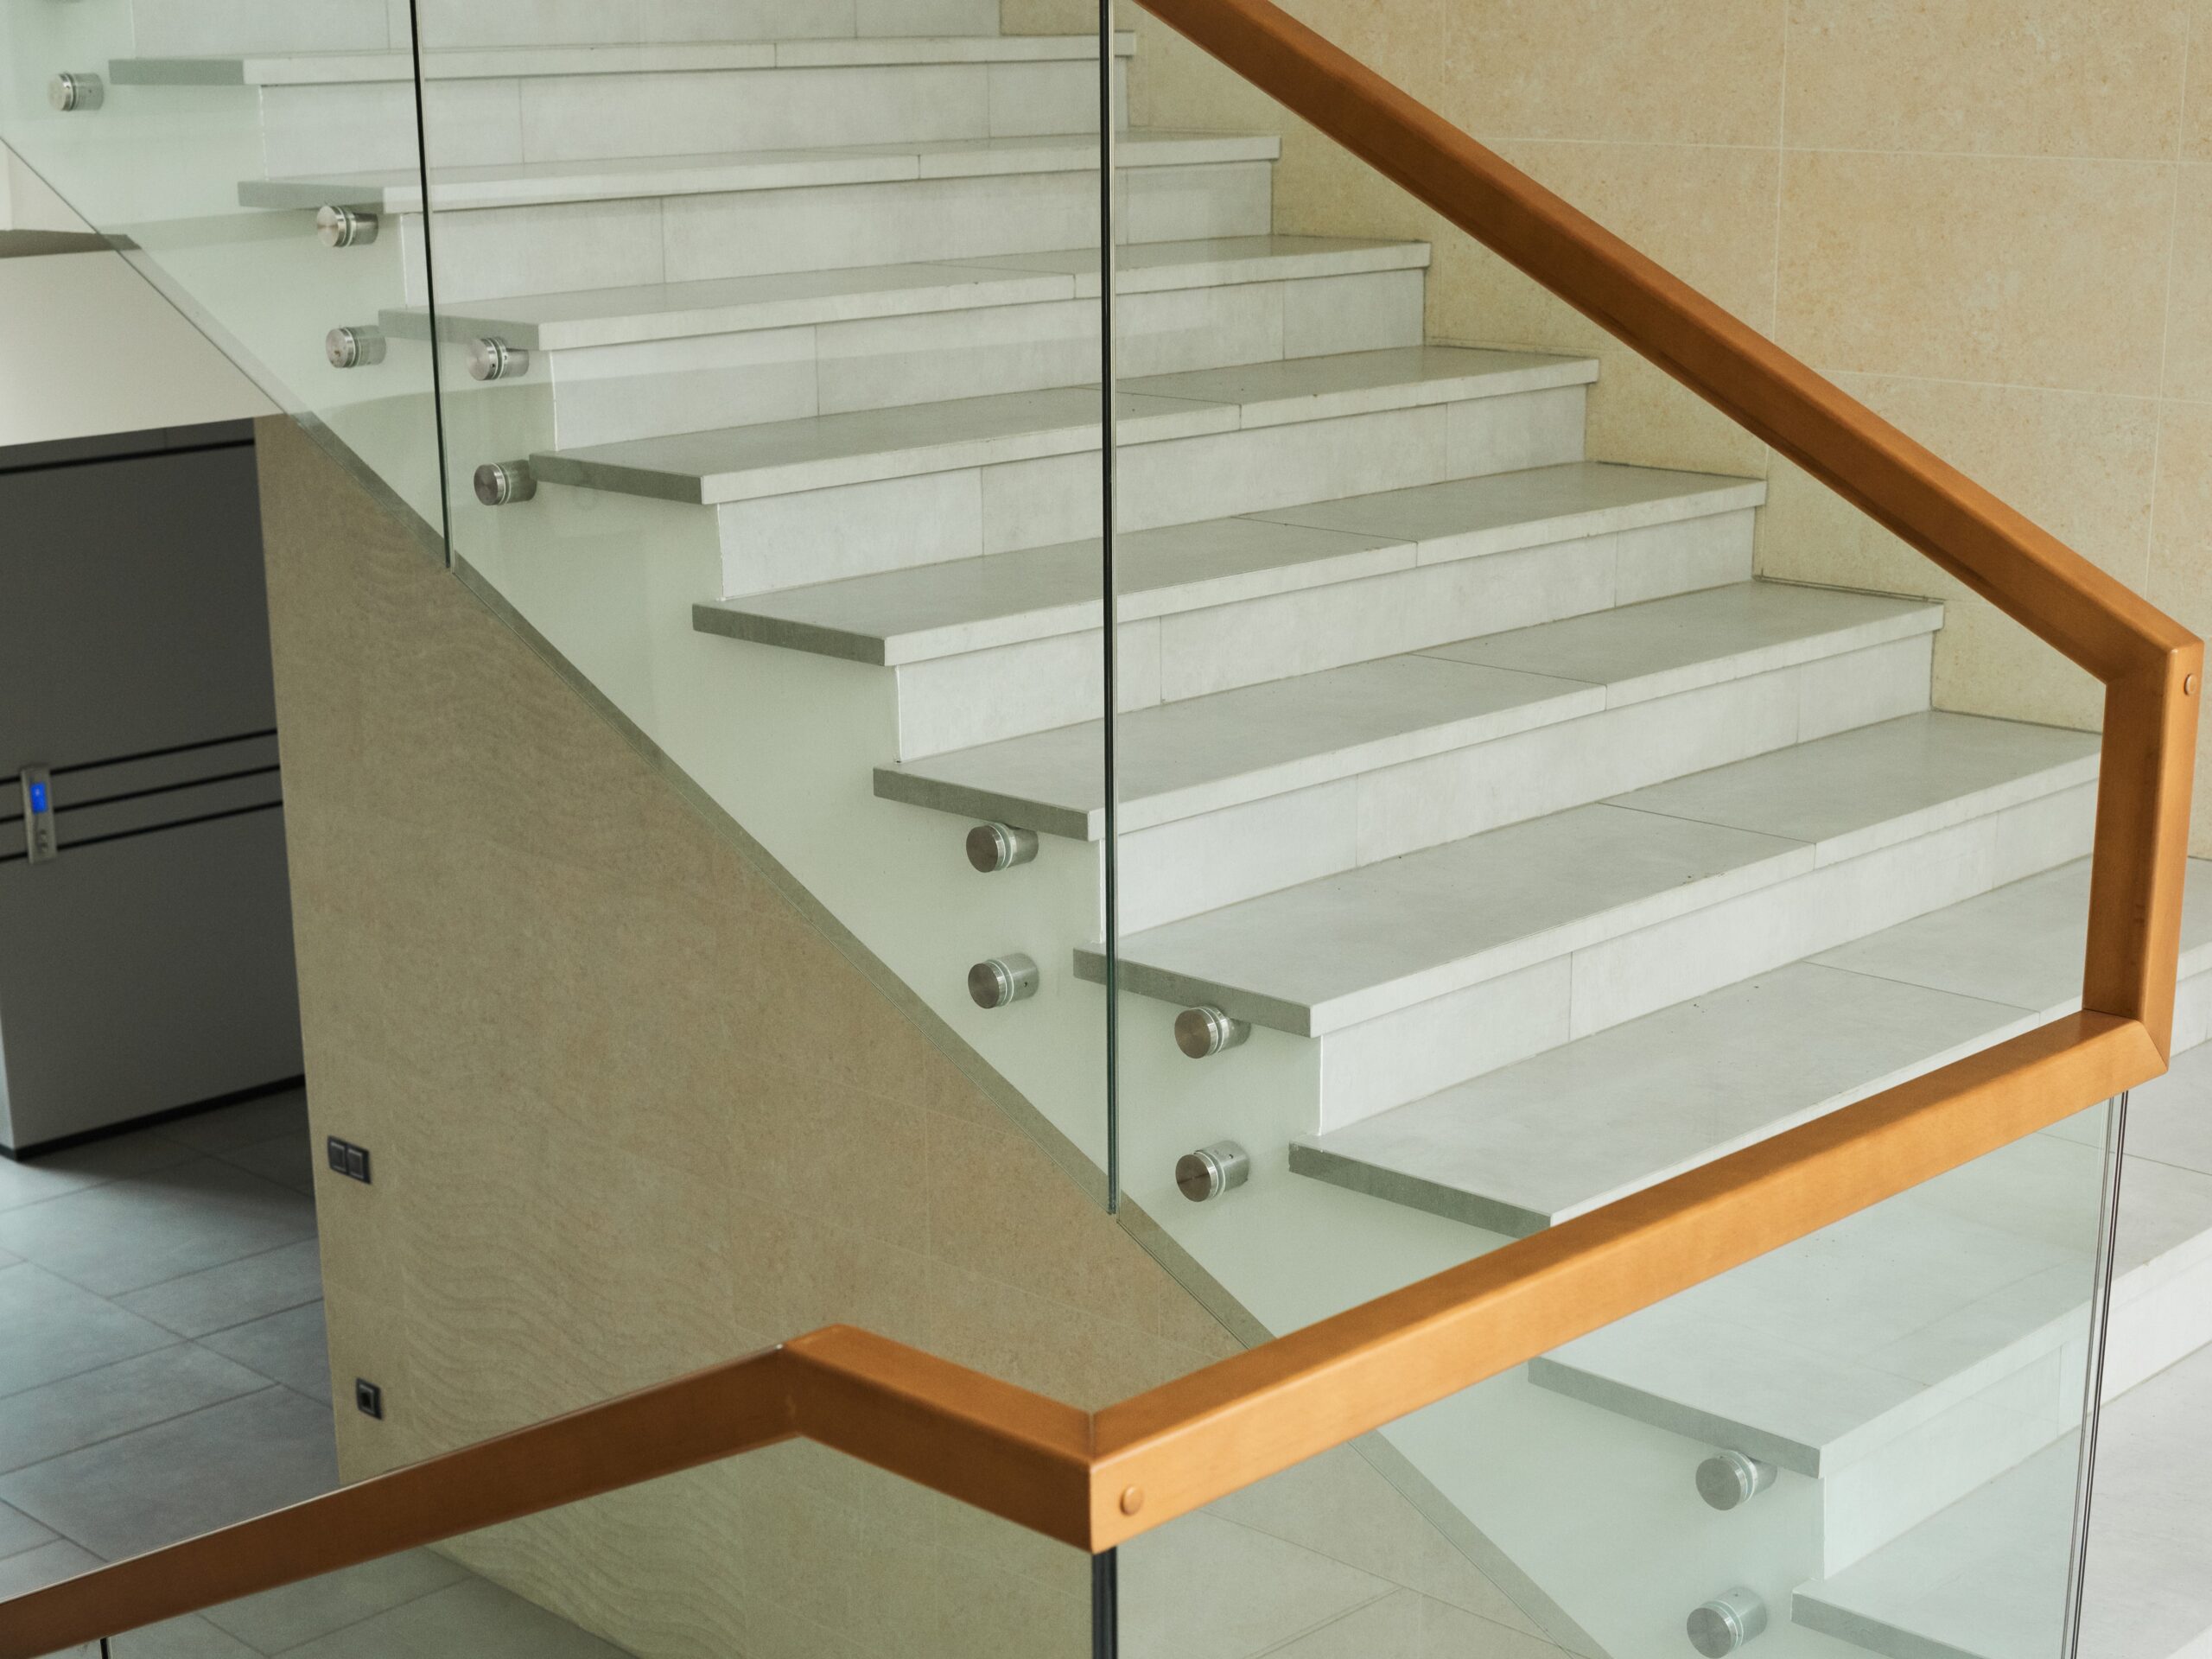 Image of stairs with glass railing in modern office building